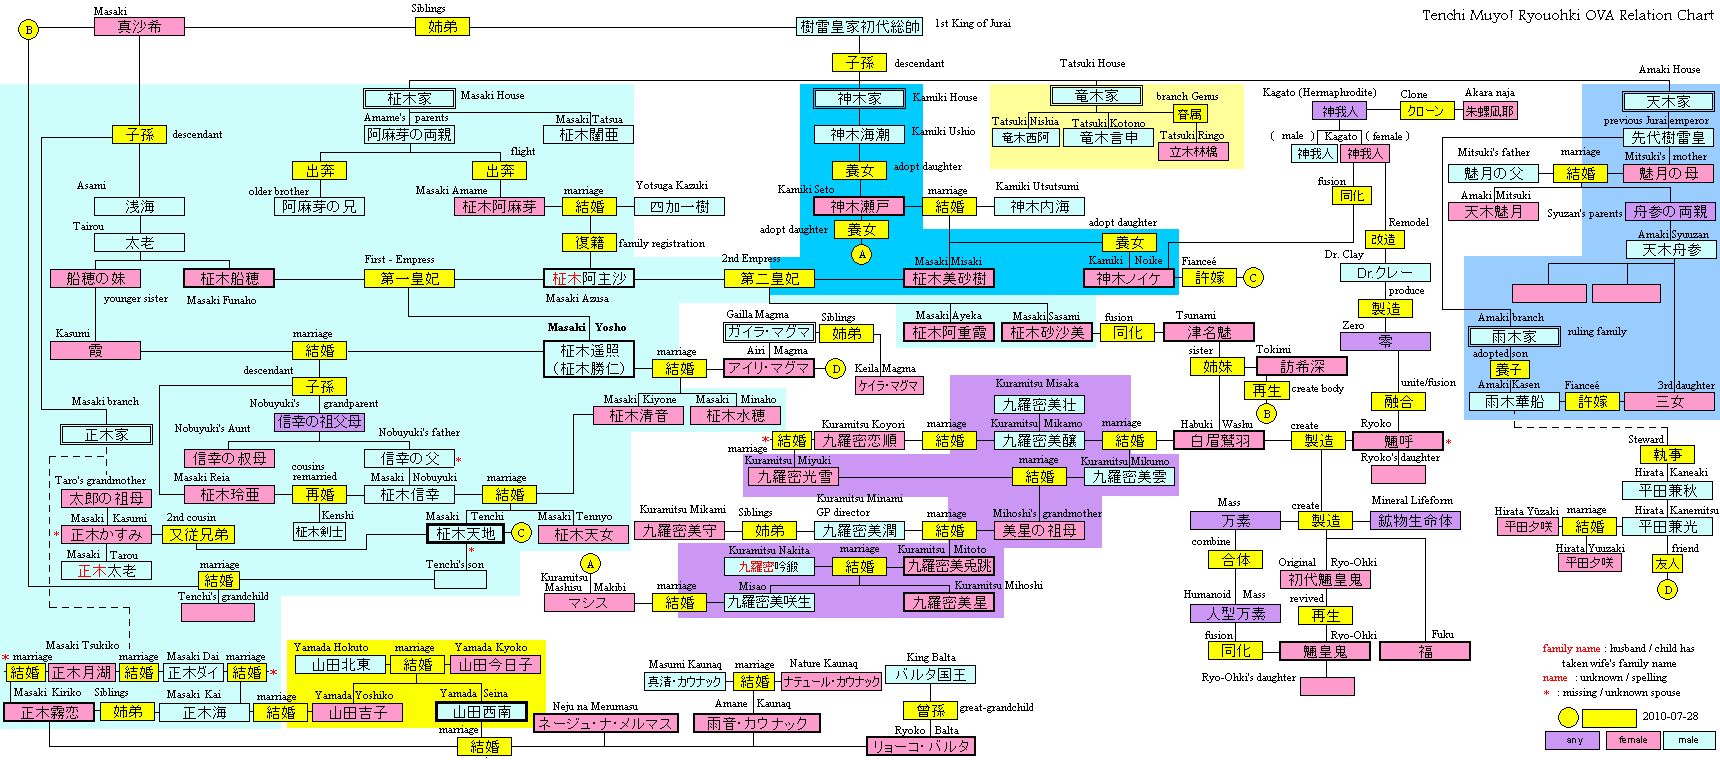 Days Of Our Lives Genealogy Chart